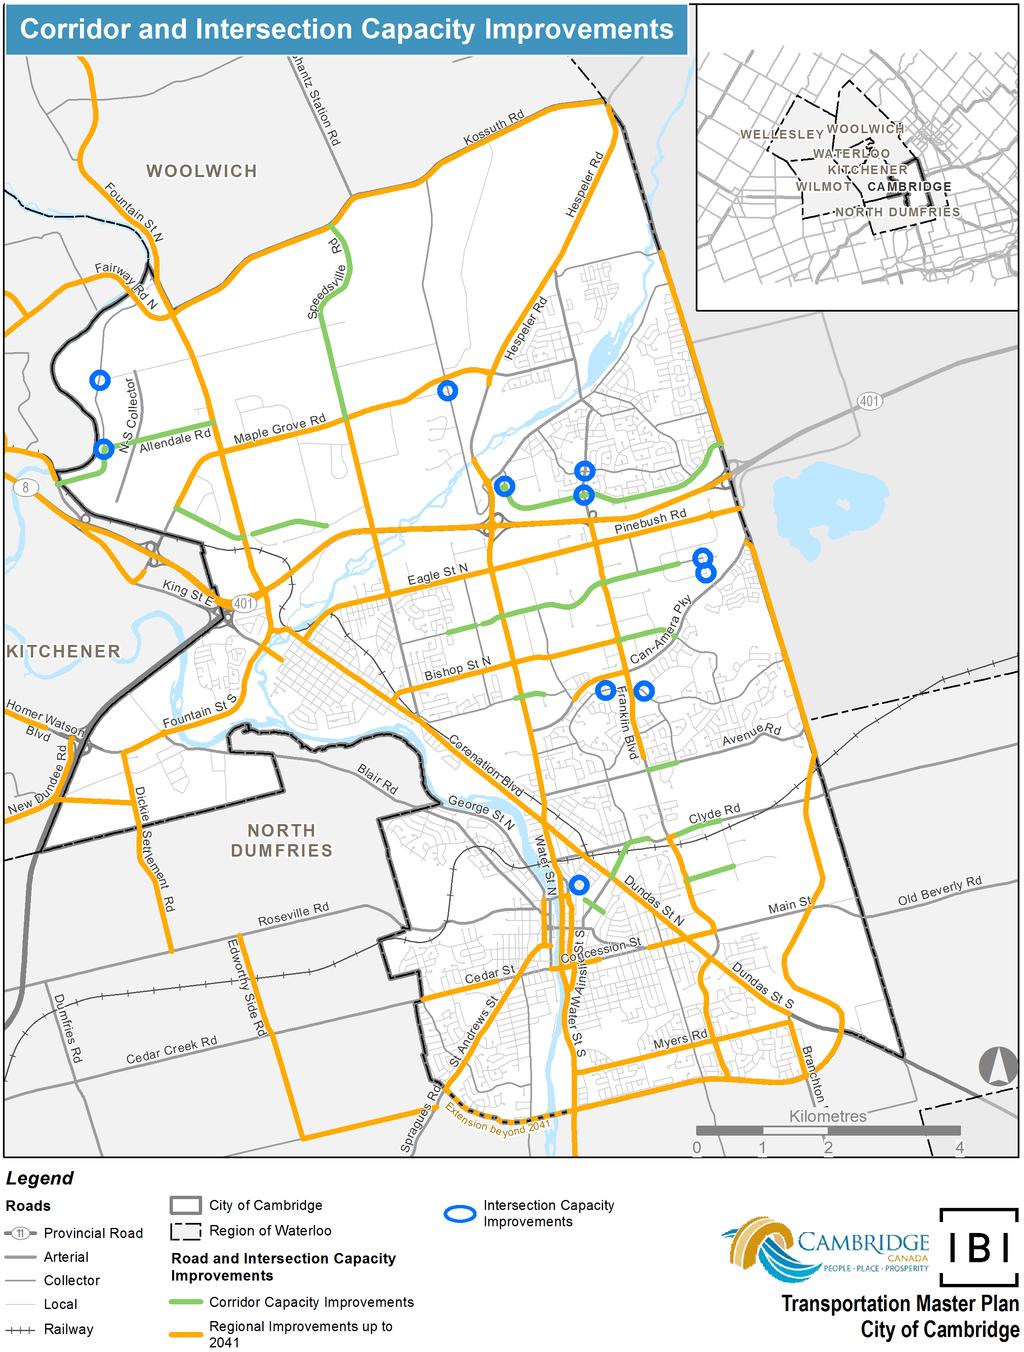 2041 Road Network Improvements Note: Final recommendations for improvements